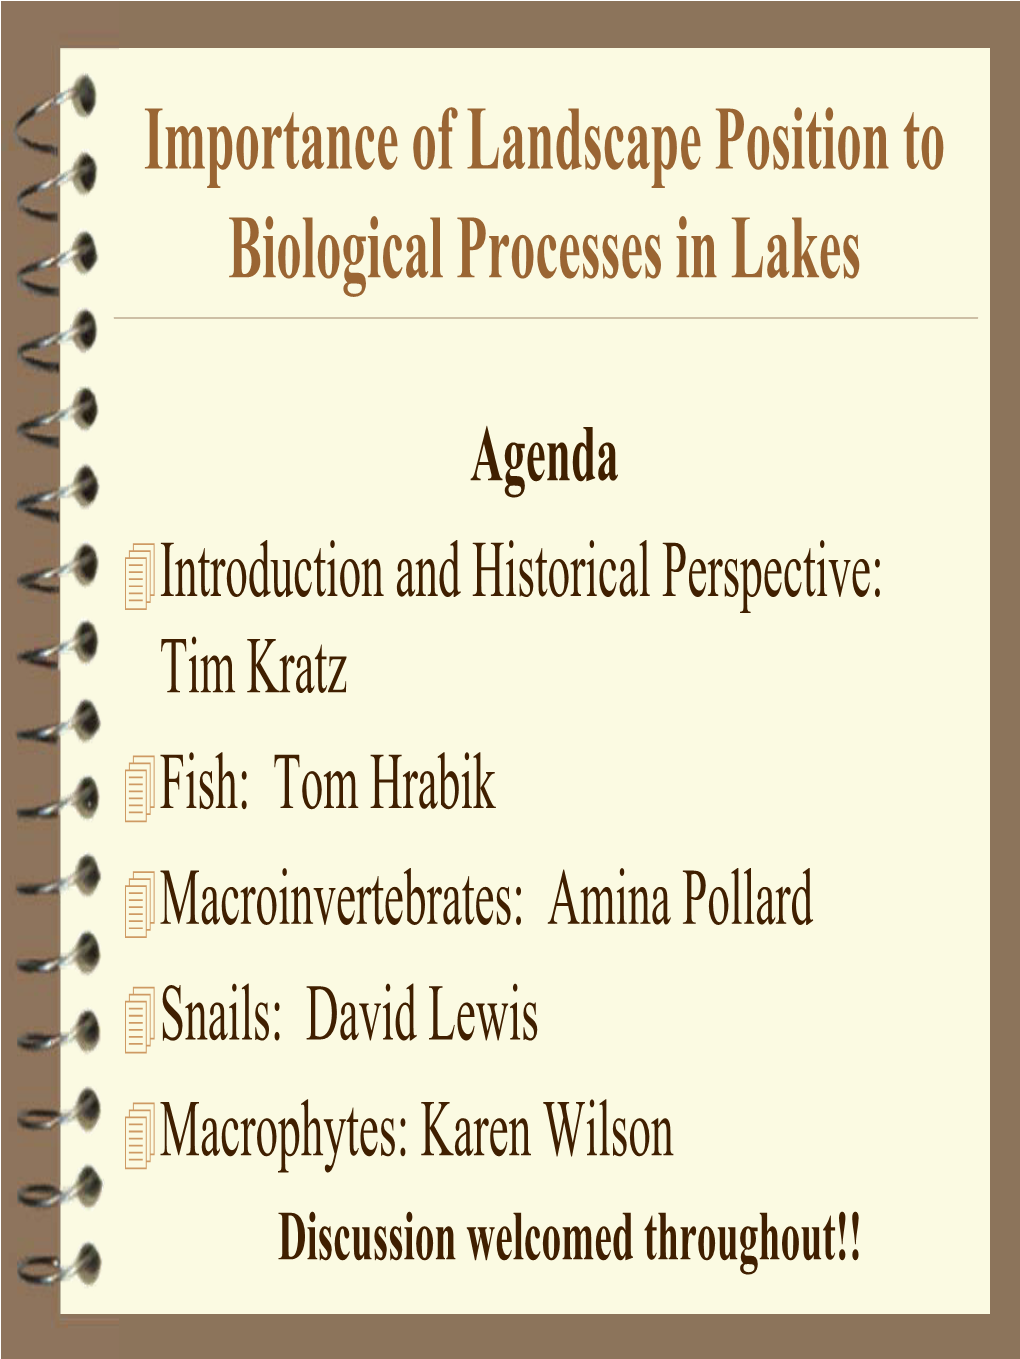 Importance of Landscape Position to Biological Processes in Lakes